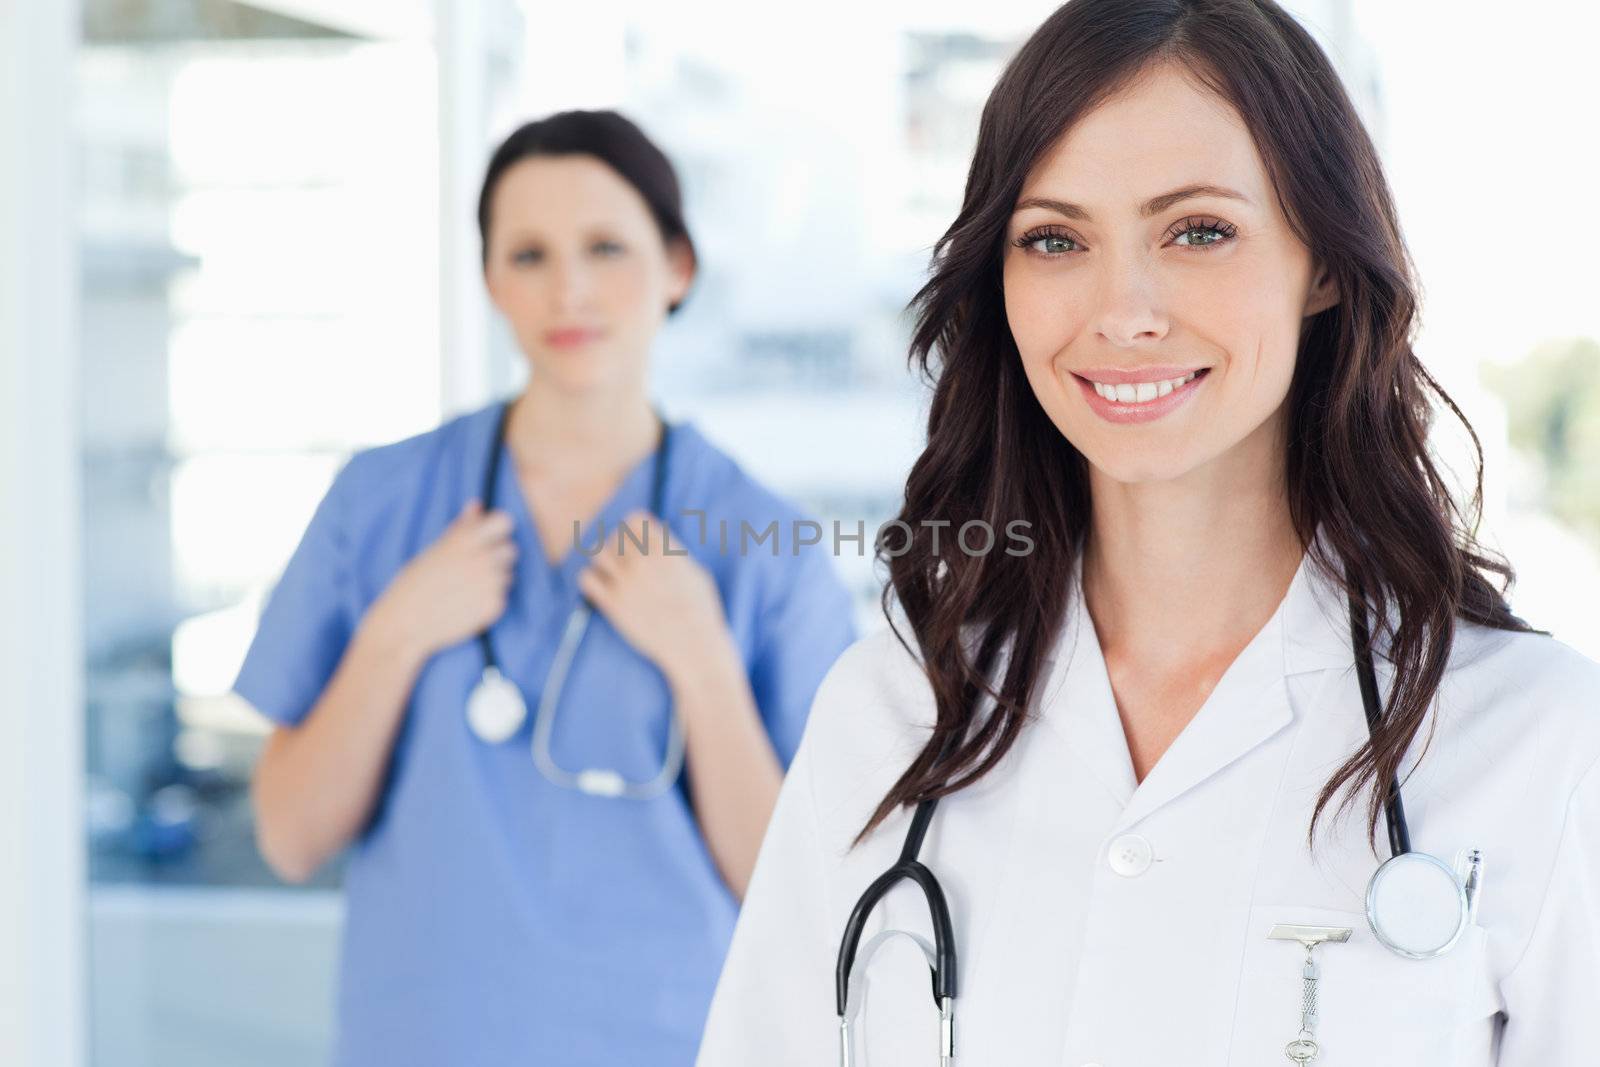 Smiling nurse accompanied by her colleague in the background by Wavebreakmedia